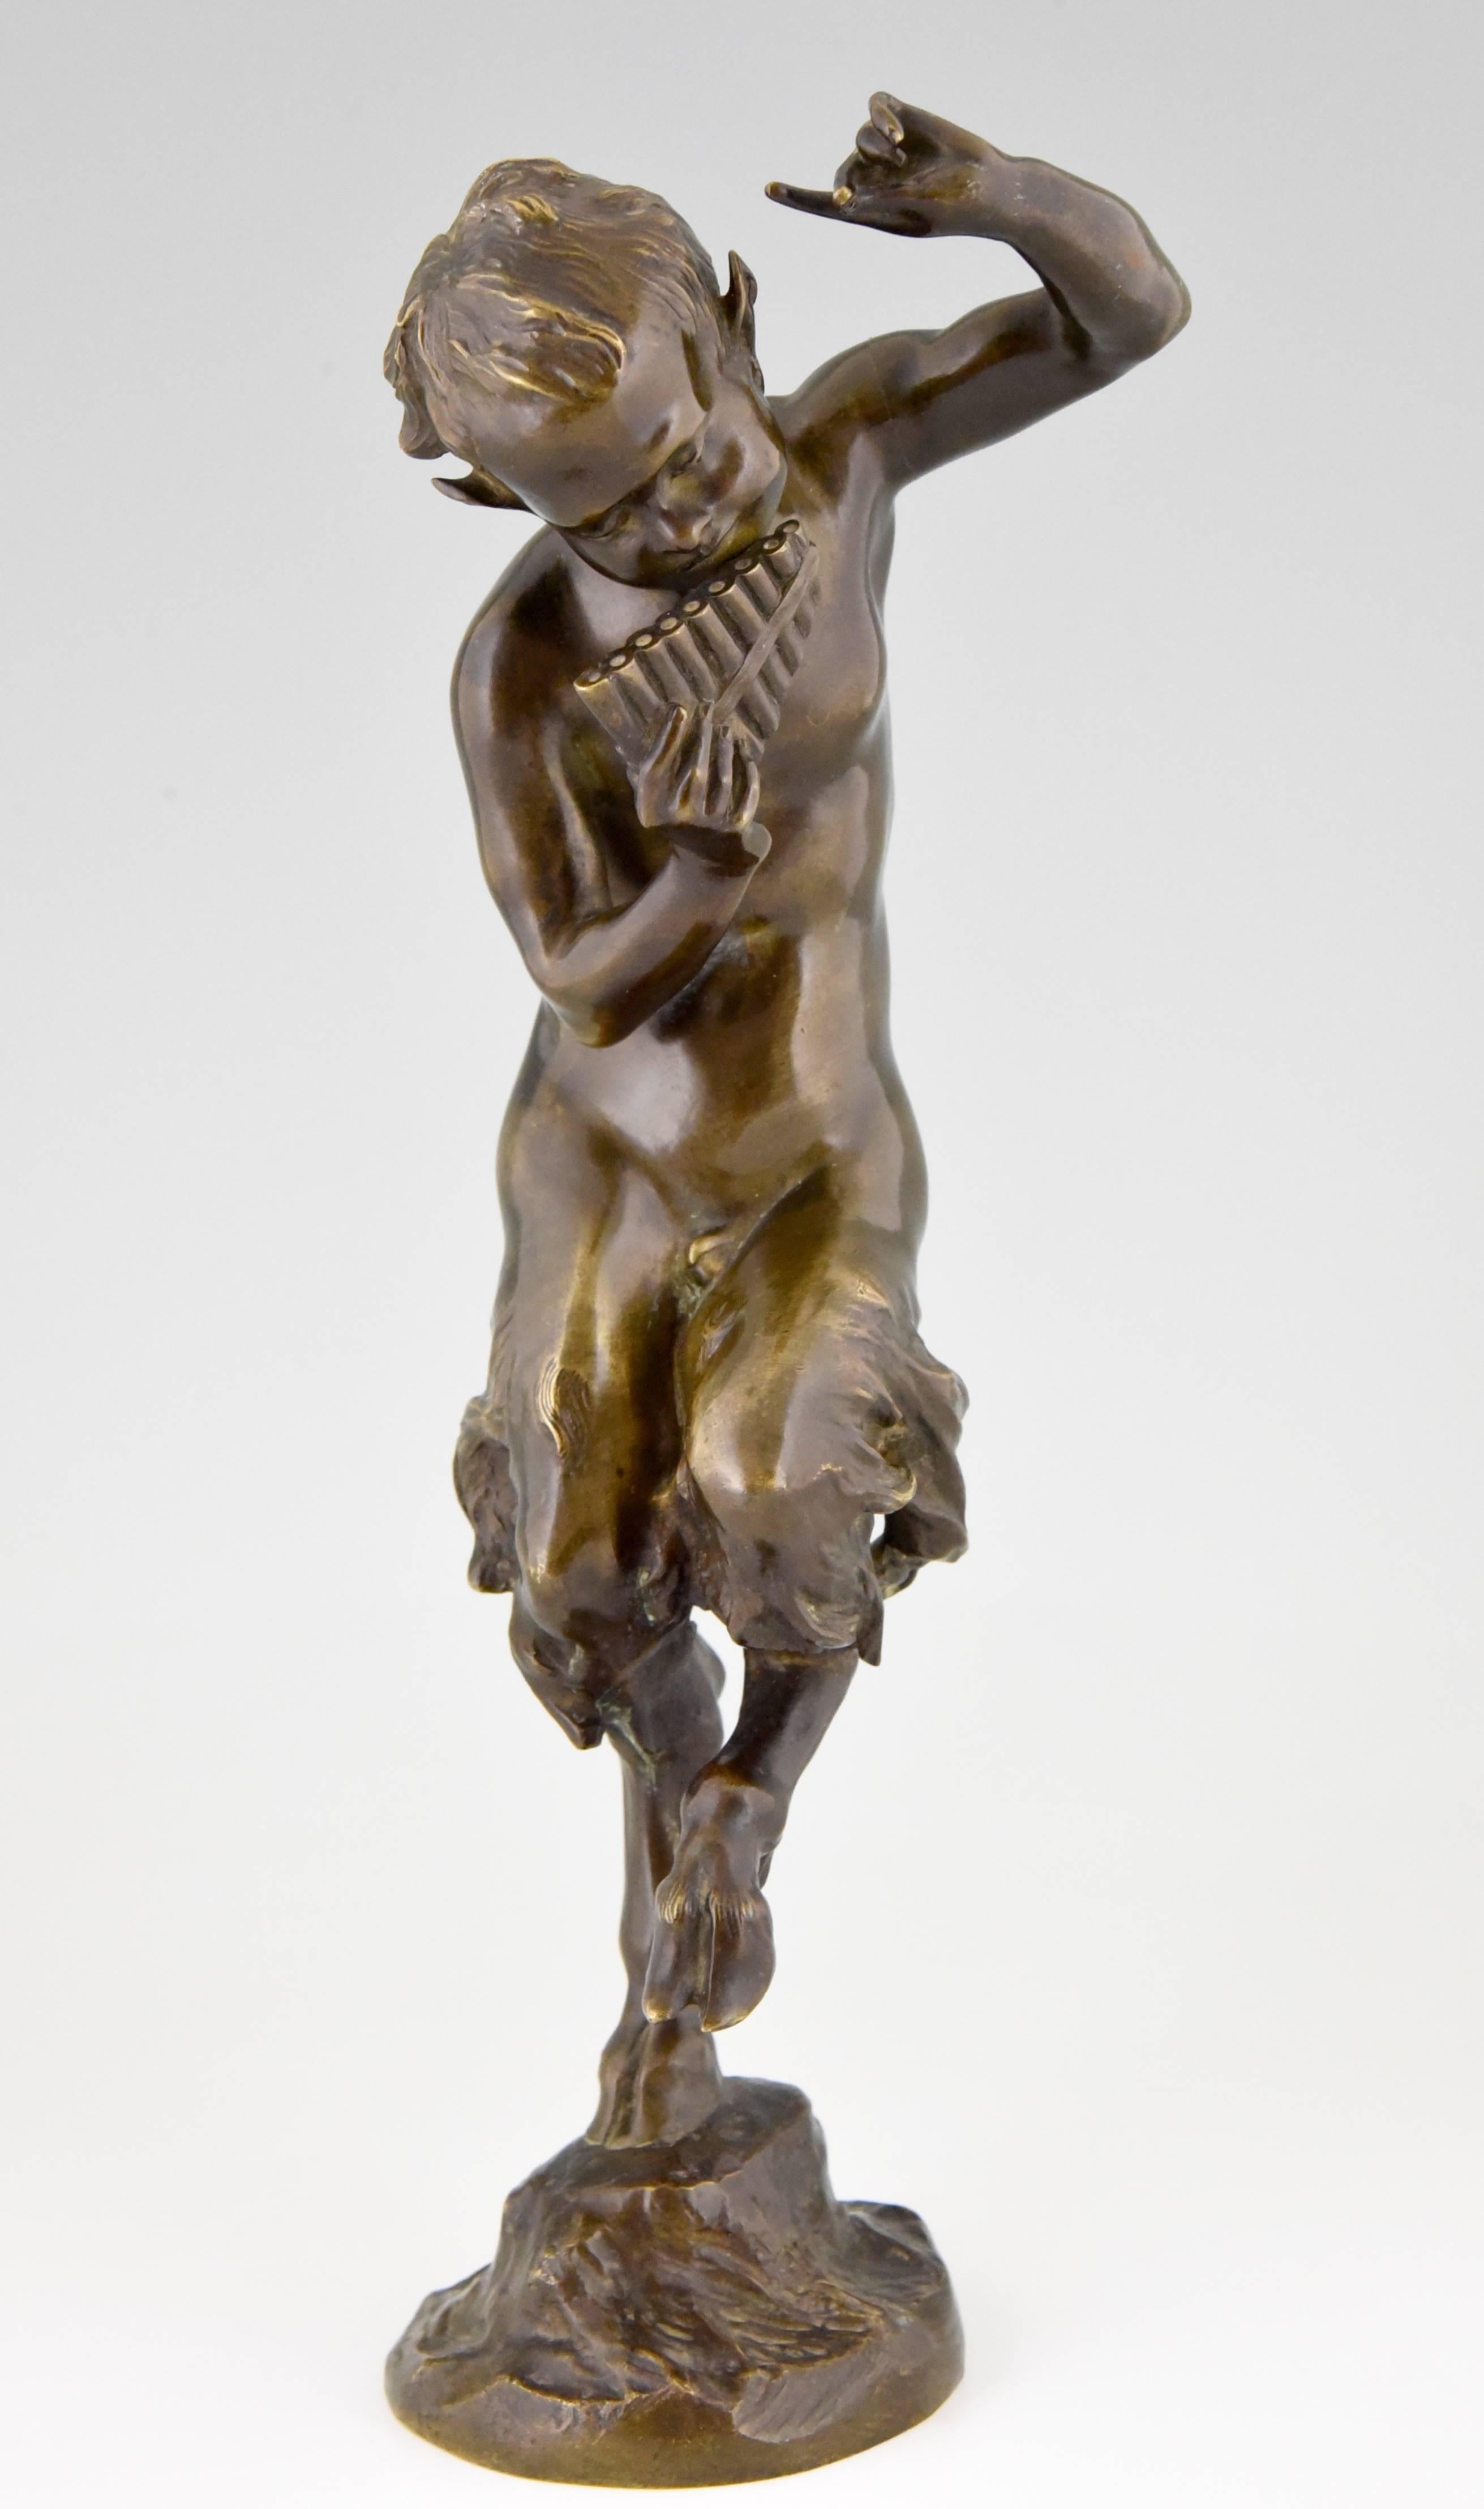 Dancing satyr with pan flute. 
By Jules Jacques Labatut, born in France in 1851.
Signature / Marks:  Labatut.  Prix de Rome
Style: Romantic.
Date:  1881.
Material: Patinated bronze. 	 
Origin:  France. 
Condition:  Good original condition,